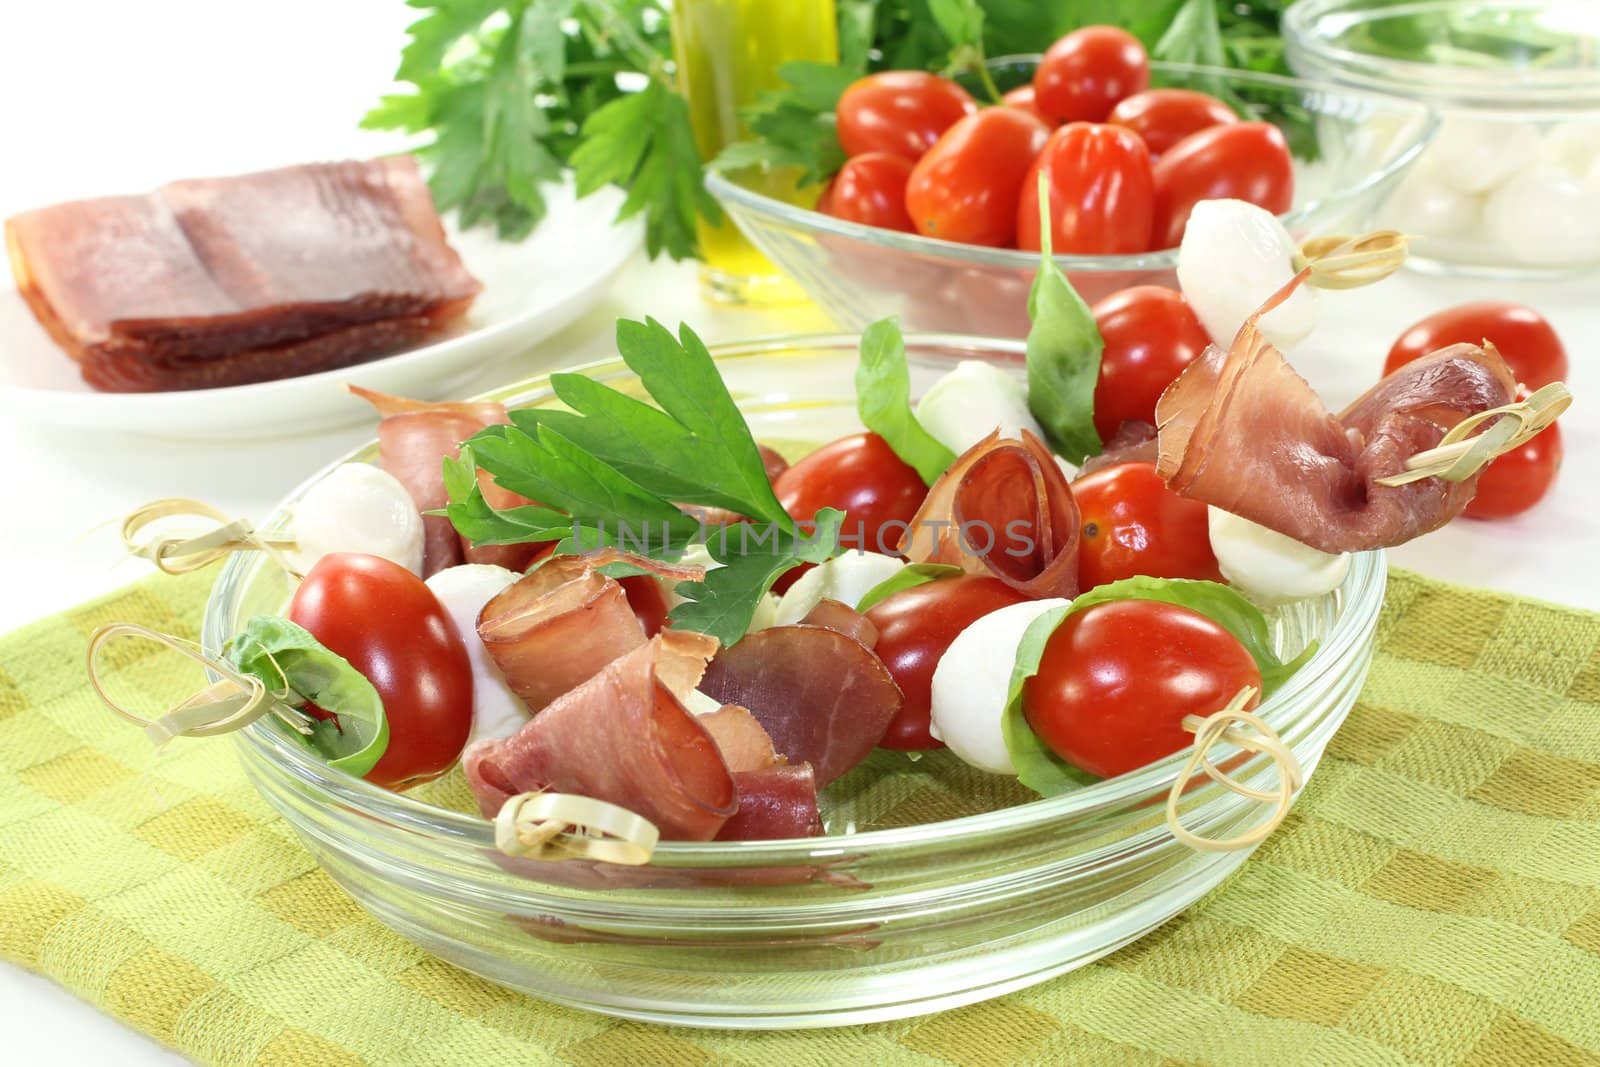 fresh Tomato, mozzarella and ham skewers with basil on a napkin before light background